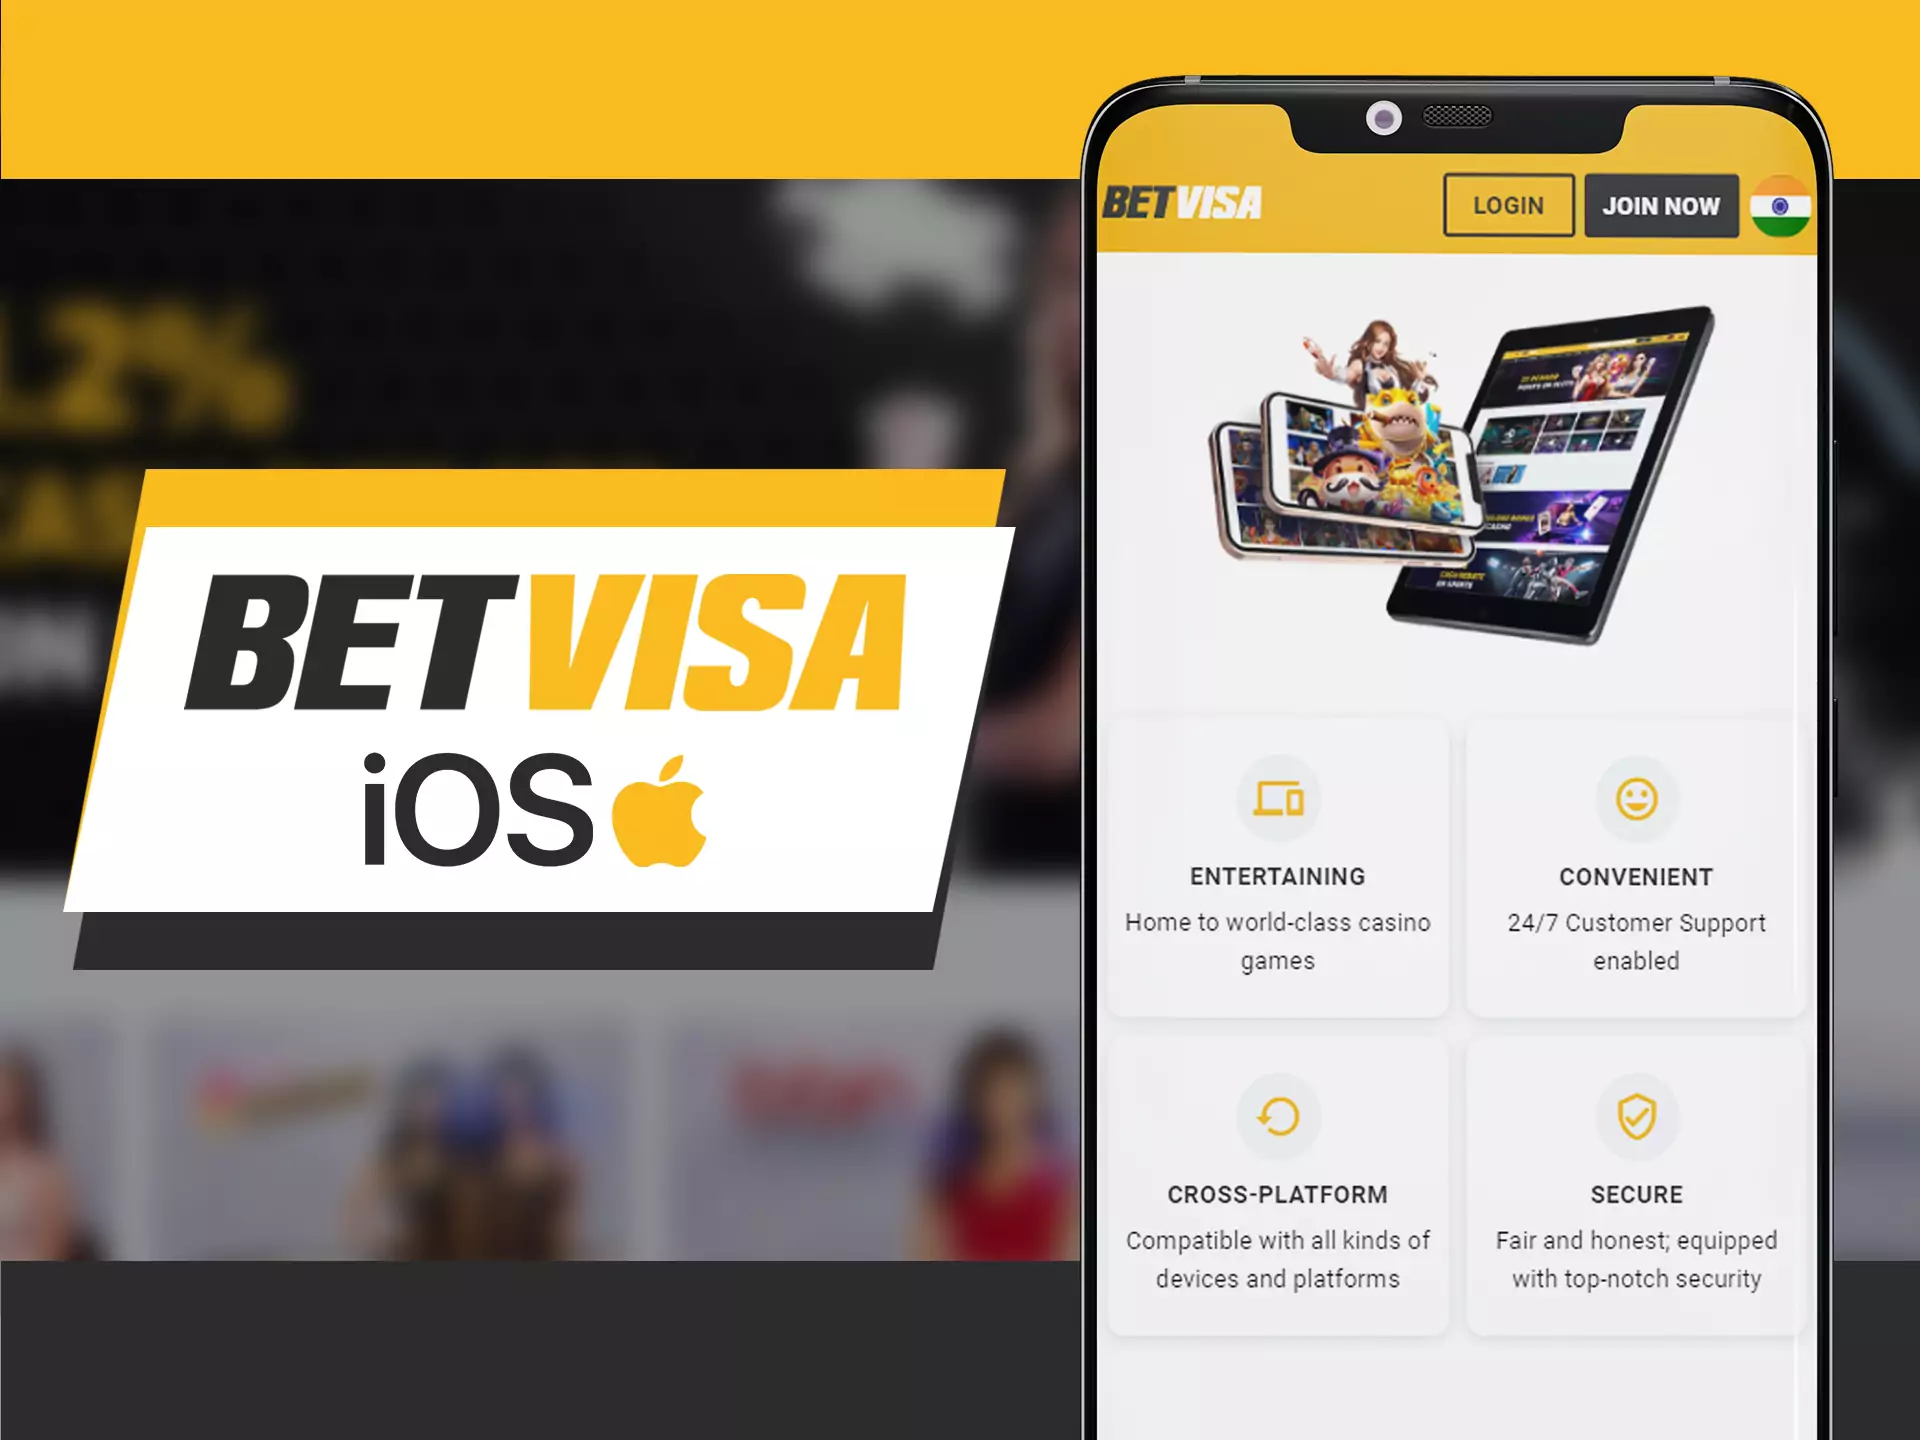 You can install Betvisa app on any of your iOS device.